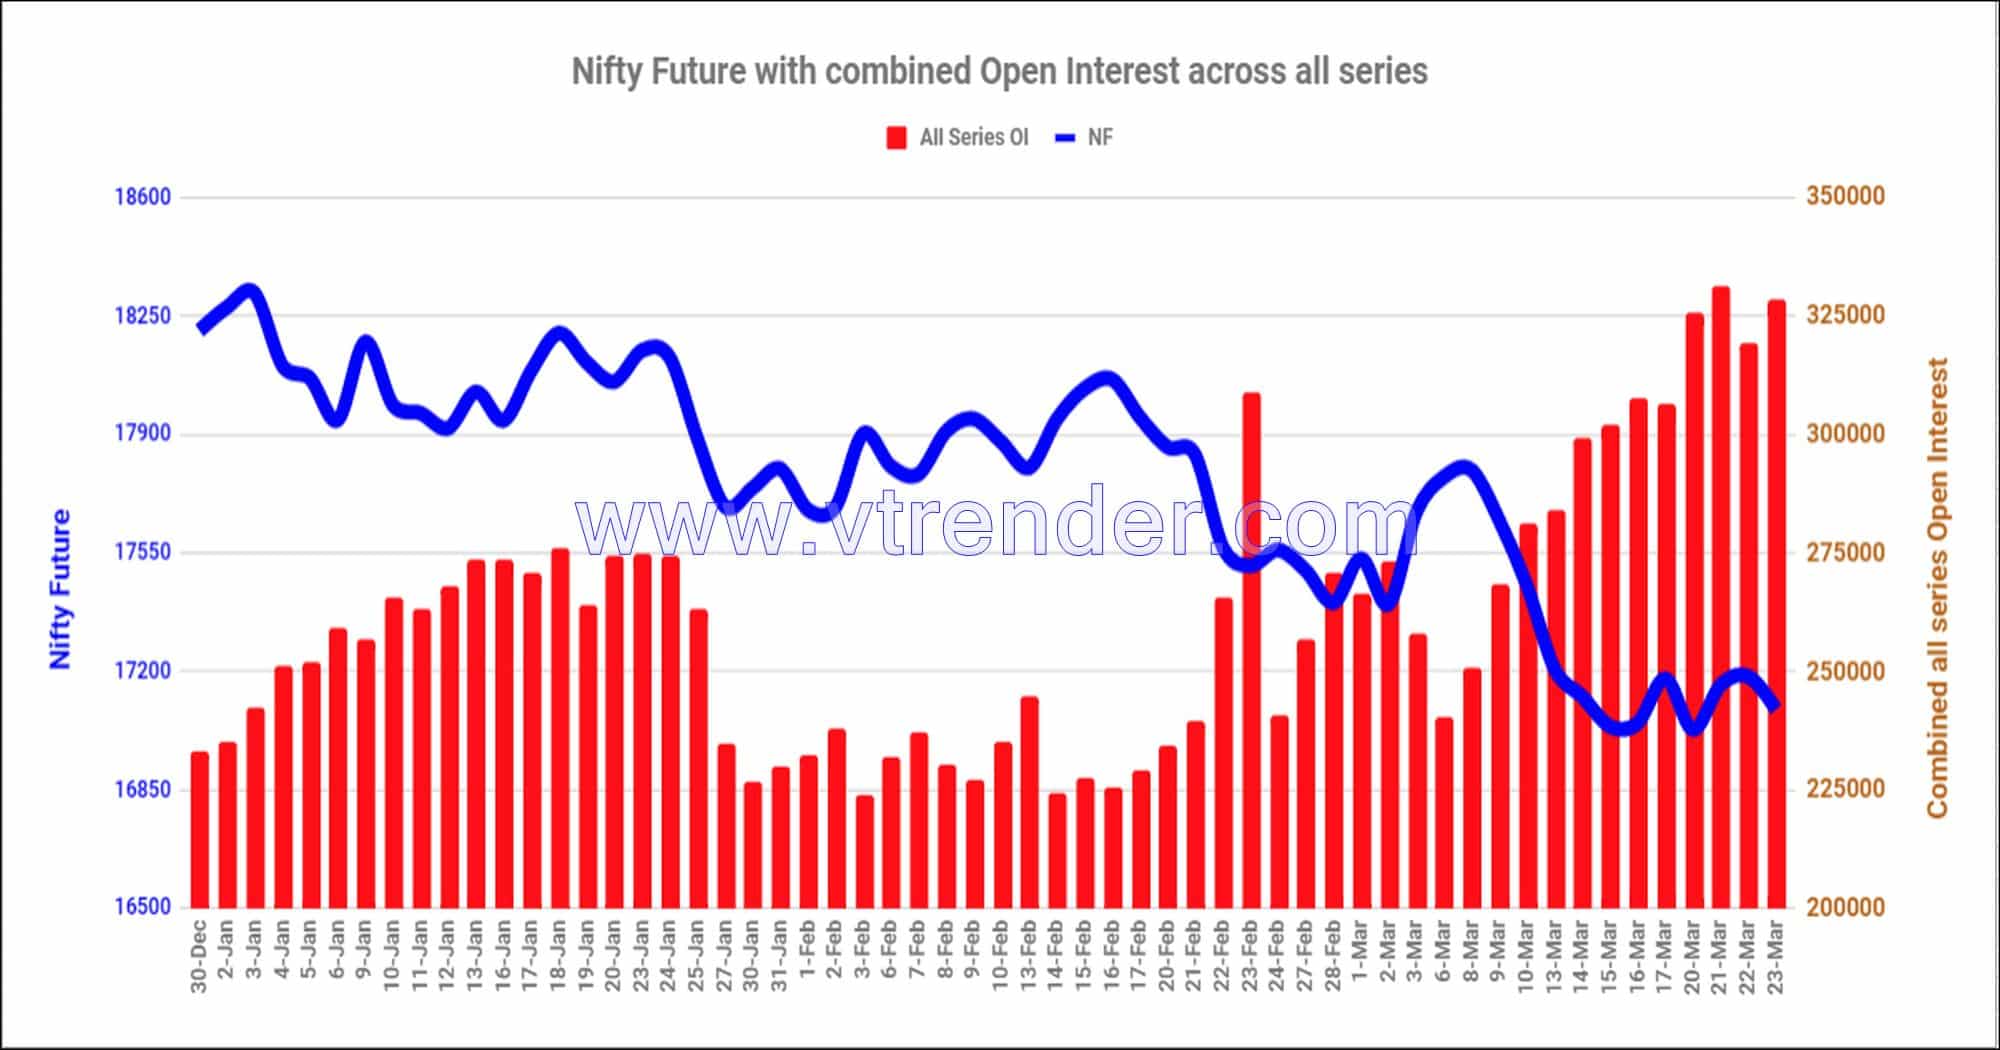 Nf23Mar Nifty And Banknifty Futures With All Series Combined Open Interest – 23Rd Mar 2023 Banknifty, Nifty, Open Interest